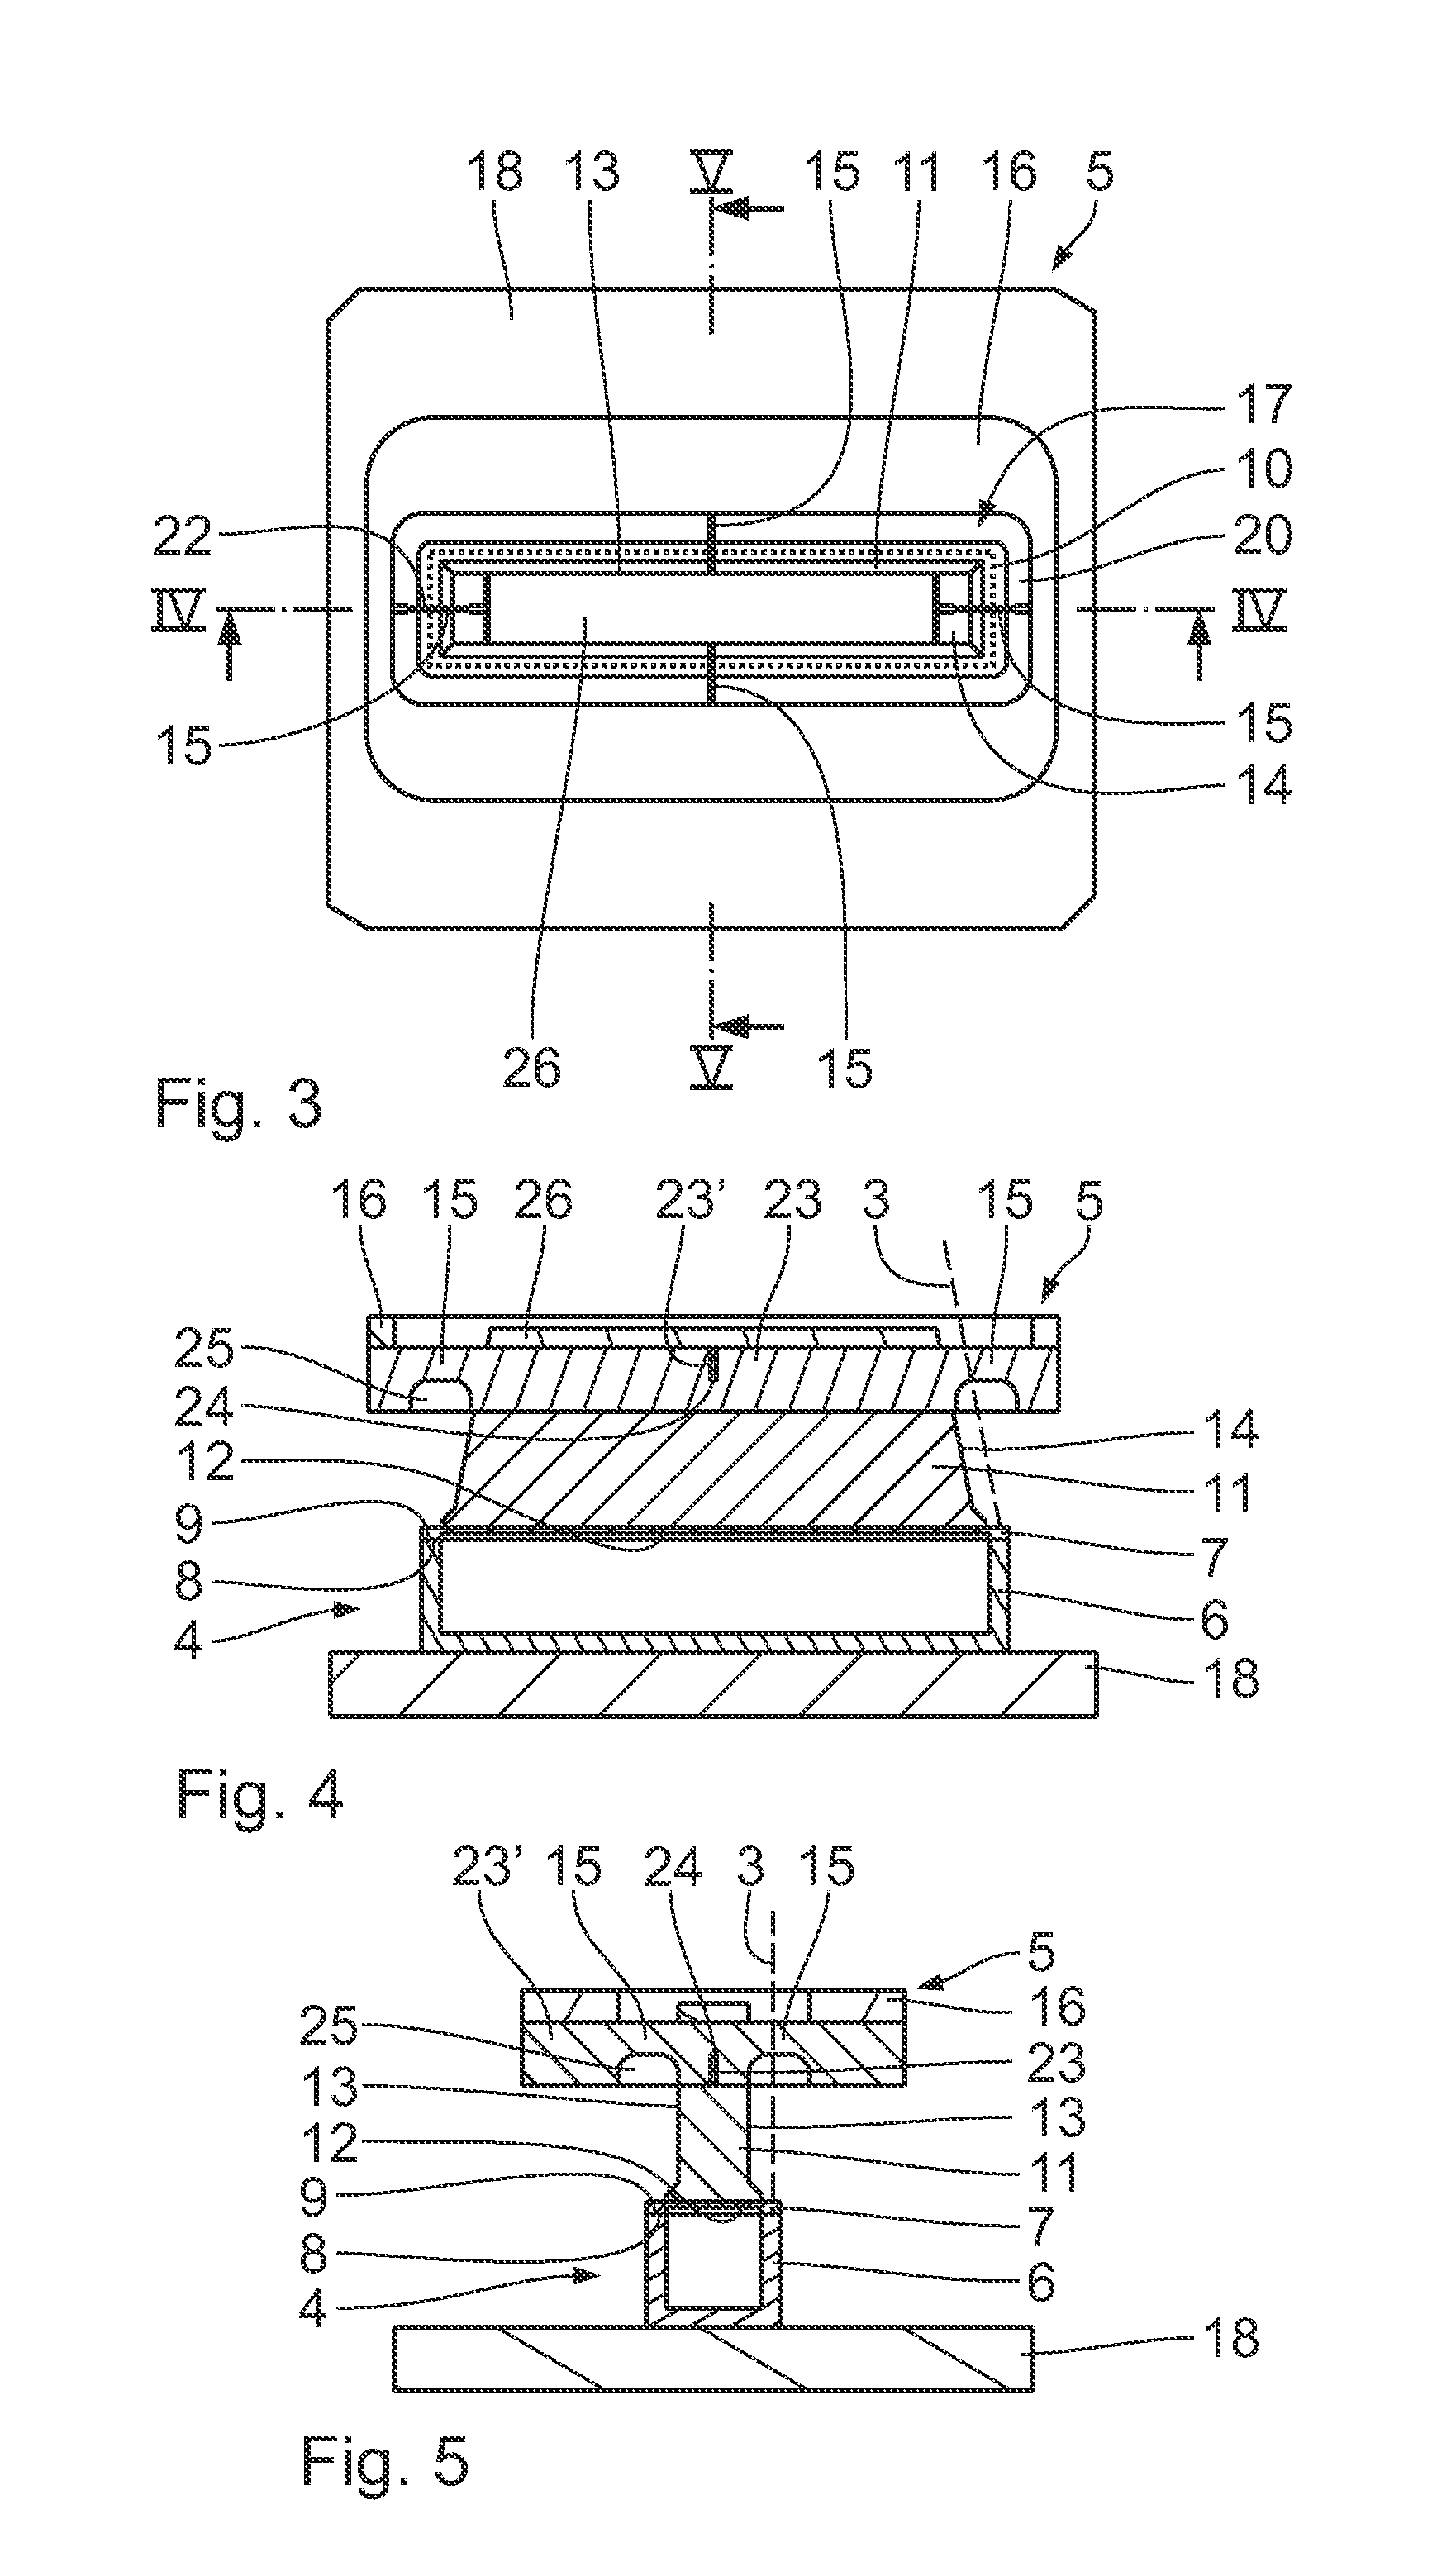 Clamping apparatus for clamping at least two component parts